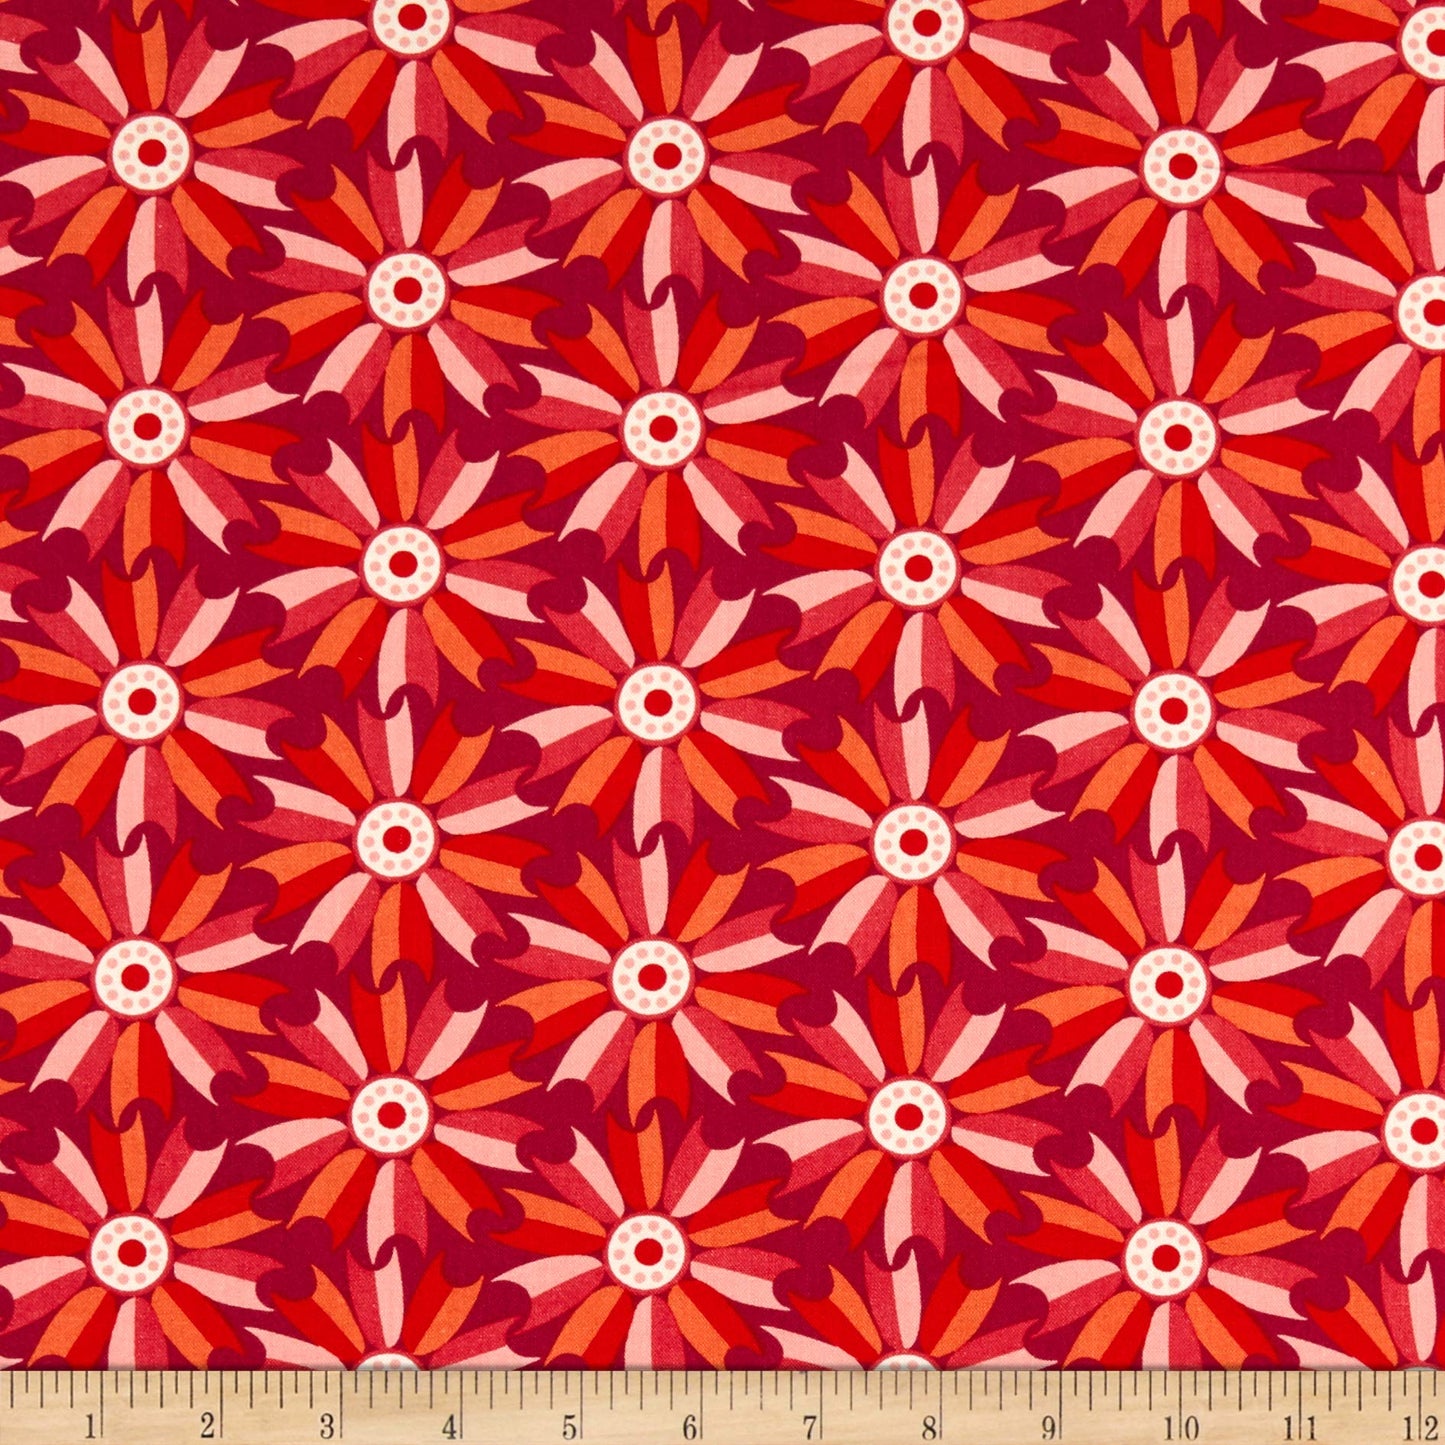 Figo (a division of Northcott) Midsommar Windmill Flower Red